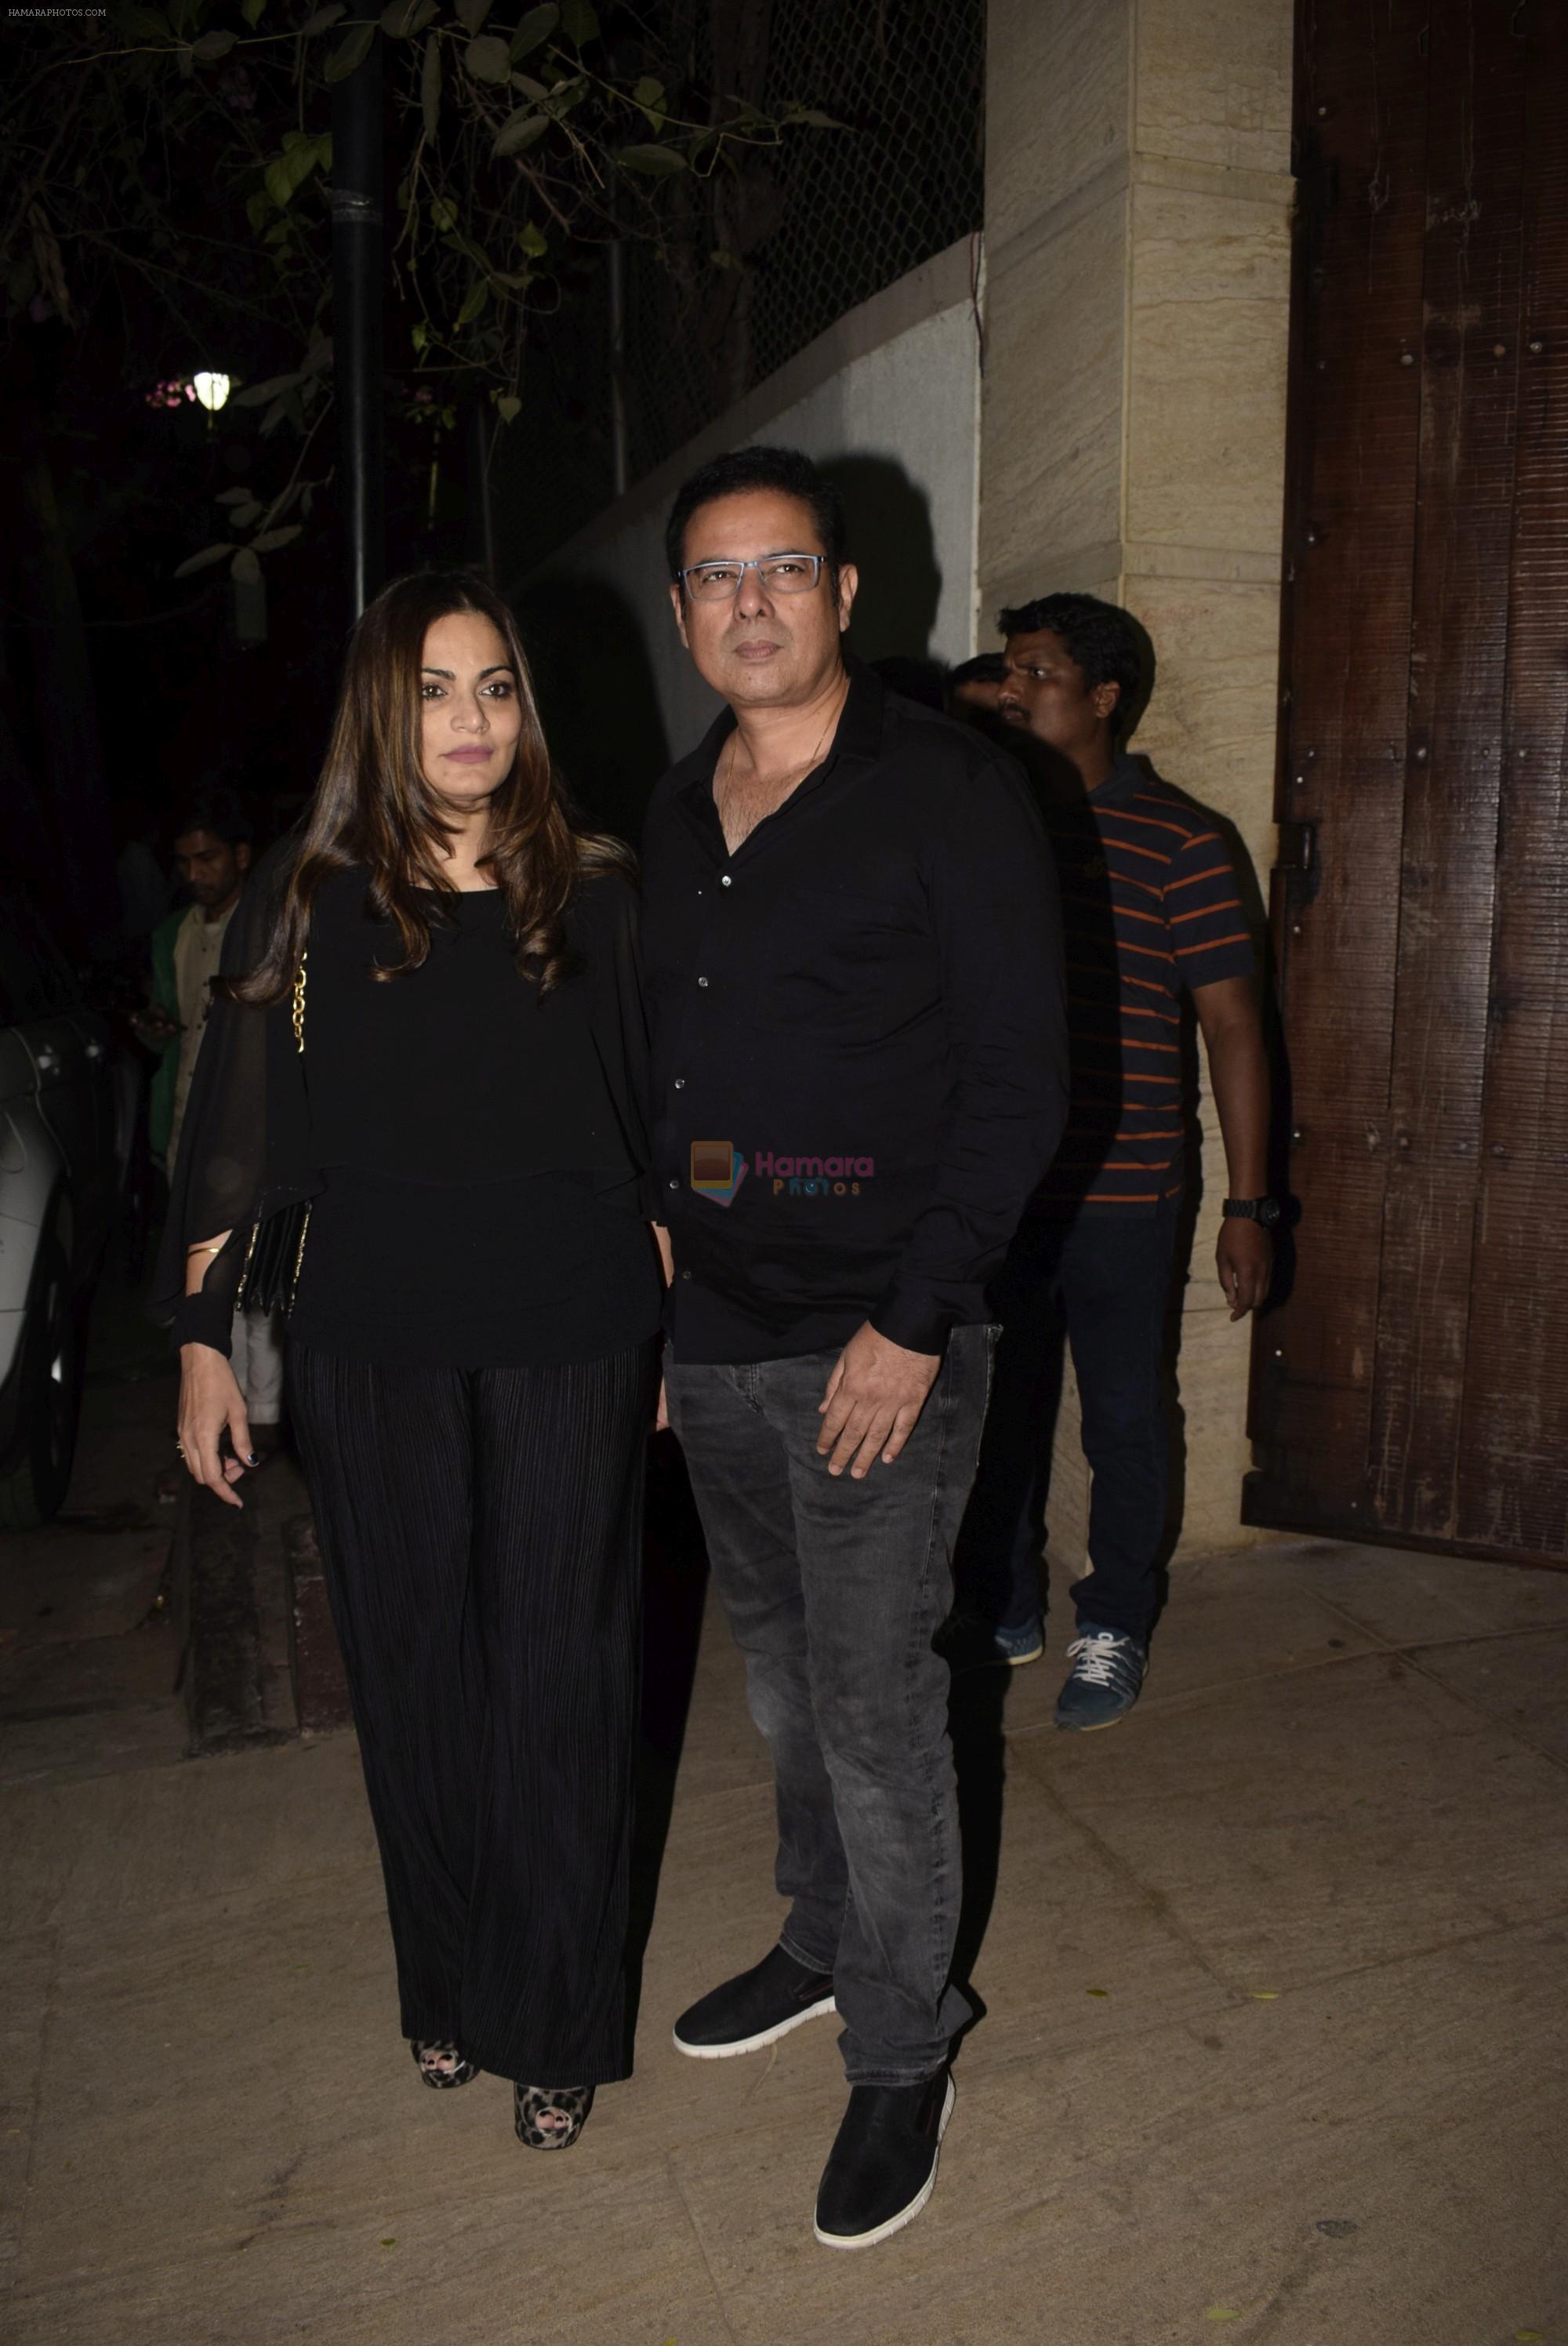 Alvira Khan, Atul Agnihotri at Bobby Deol's birthday party at his home in juhu on 27th Jan 2019